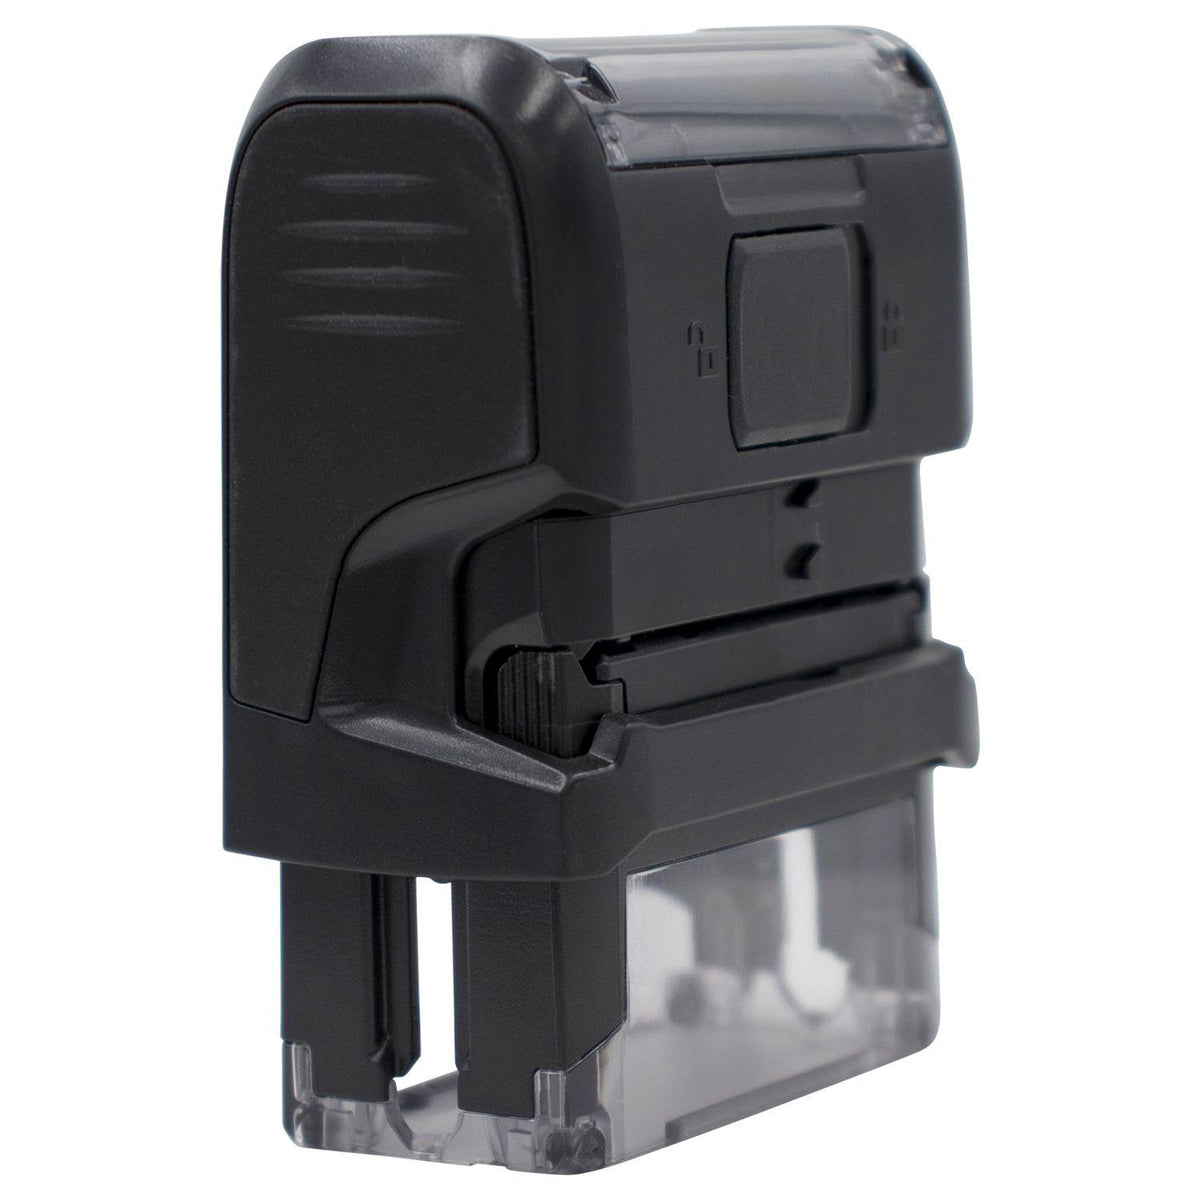 Large Self Inking Copy Stamp - Engineer Seal Stamps - Brand_Trodat, Impression Size_Large, Stamp Type_Self-Inking Stamp, Type of Use_Office, Type of Use_Professional